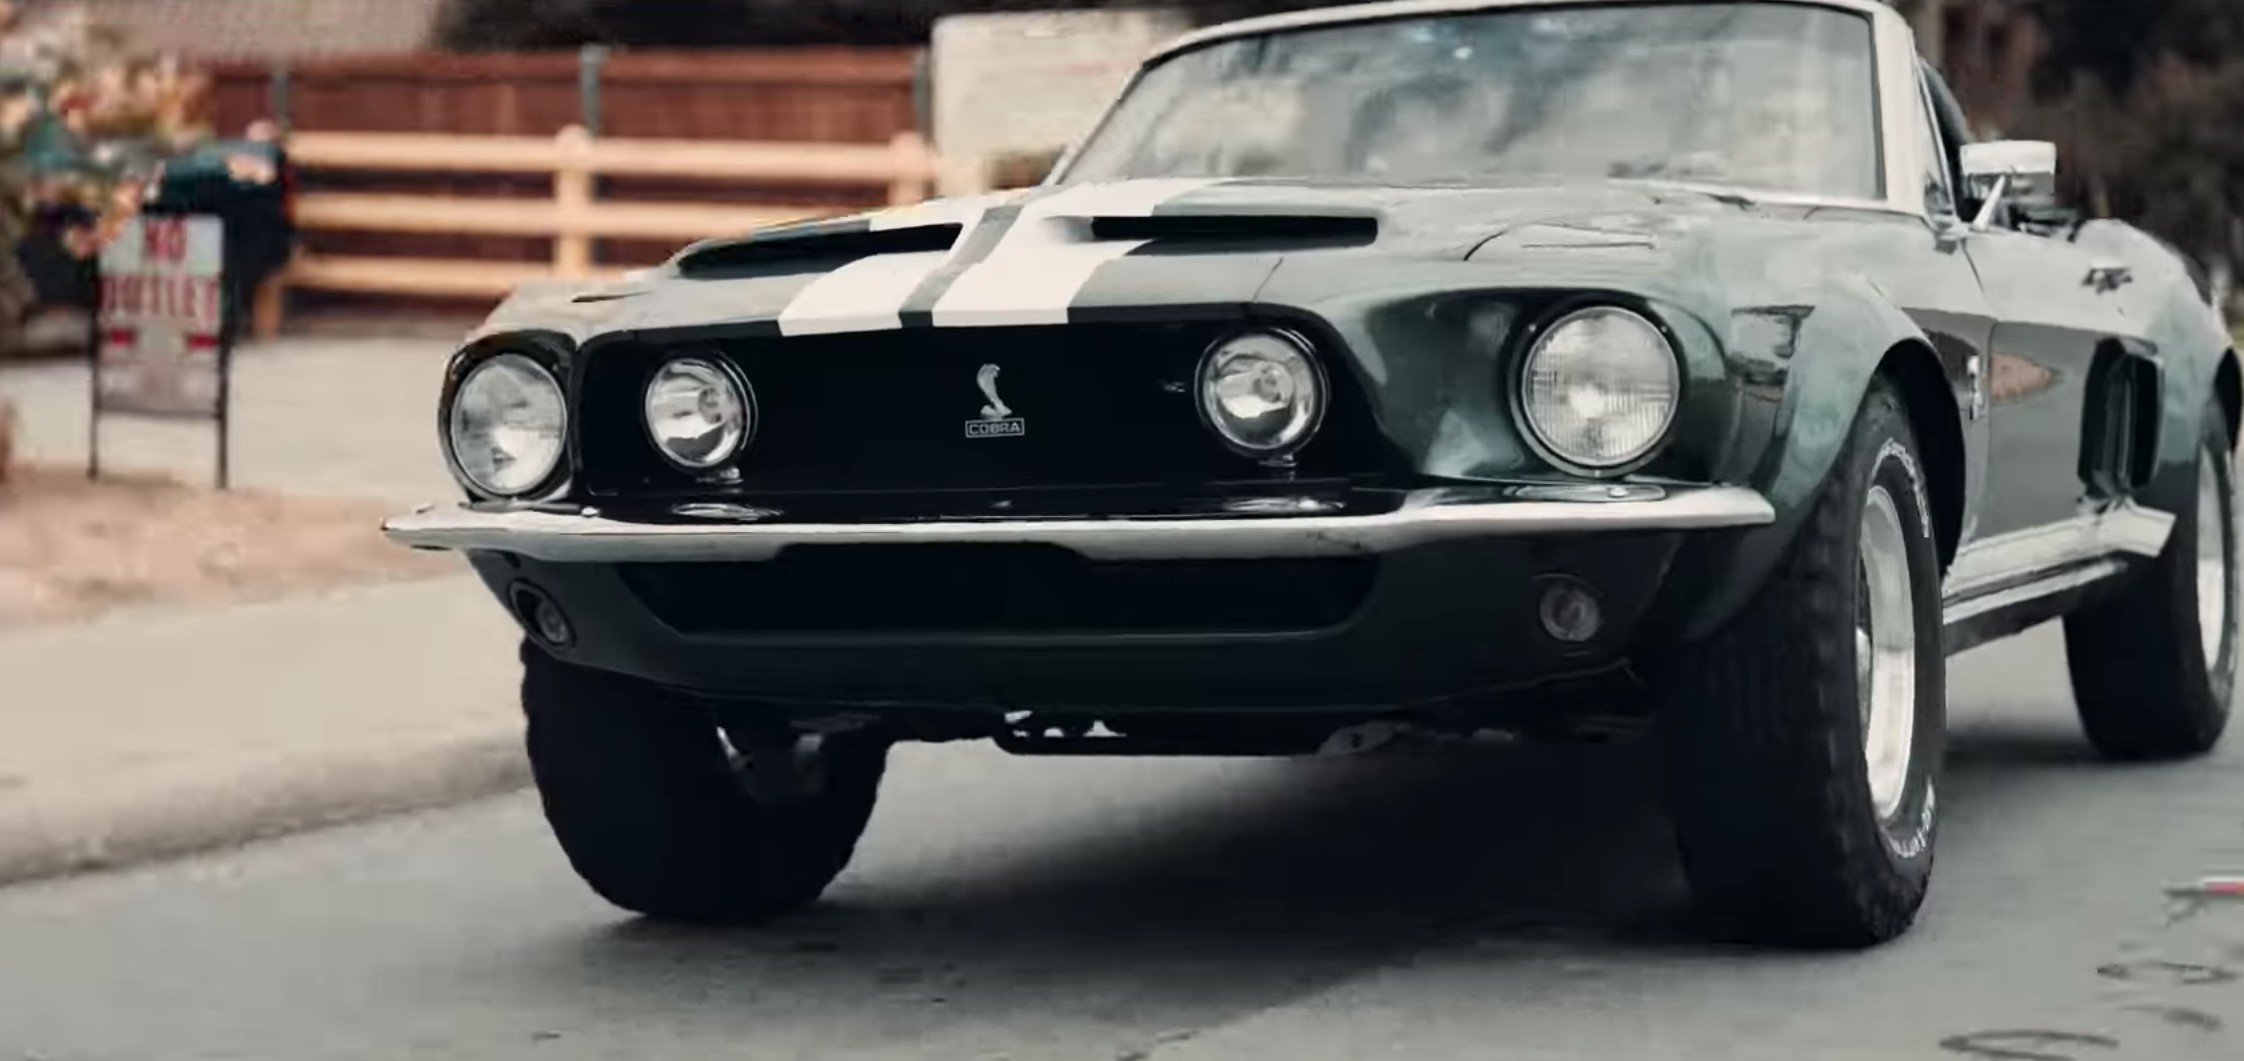 1968 Shelby Gt350 used in The Thomas Crown Affair